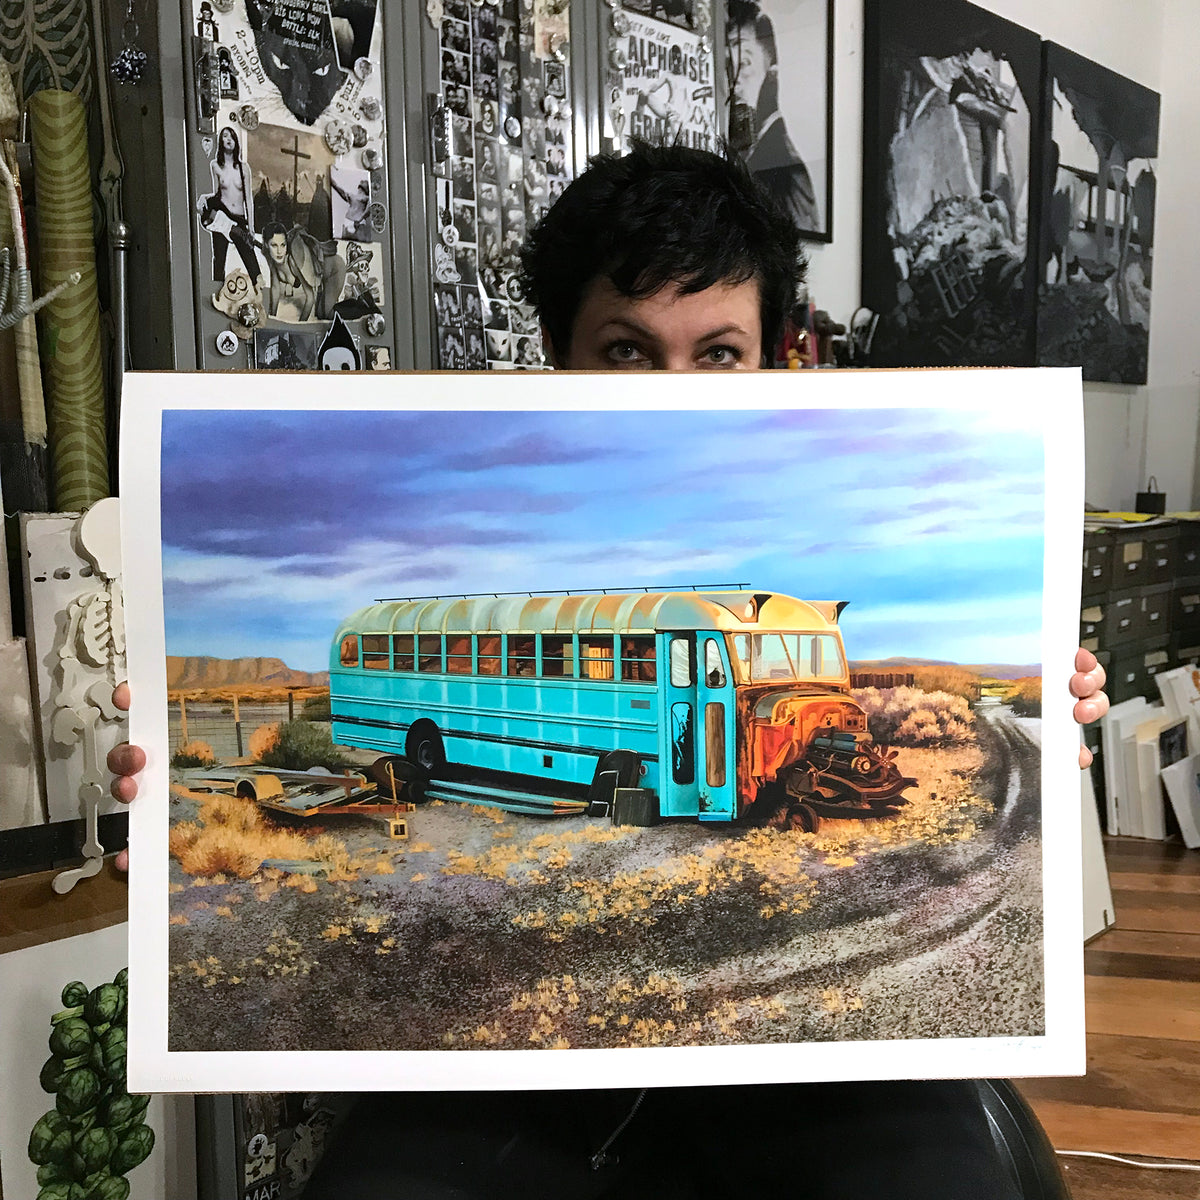 Jessica Hess &quot;Last Stop&quot; - Archival Print, Limited Edition of 25 - 18 x 24&quot;